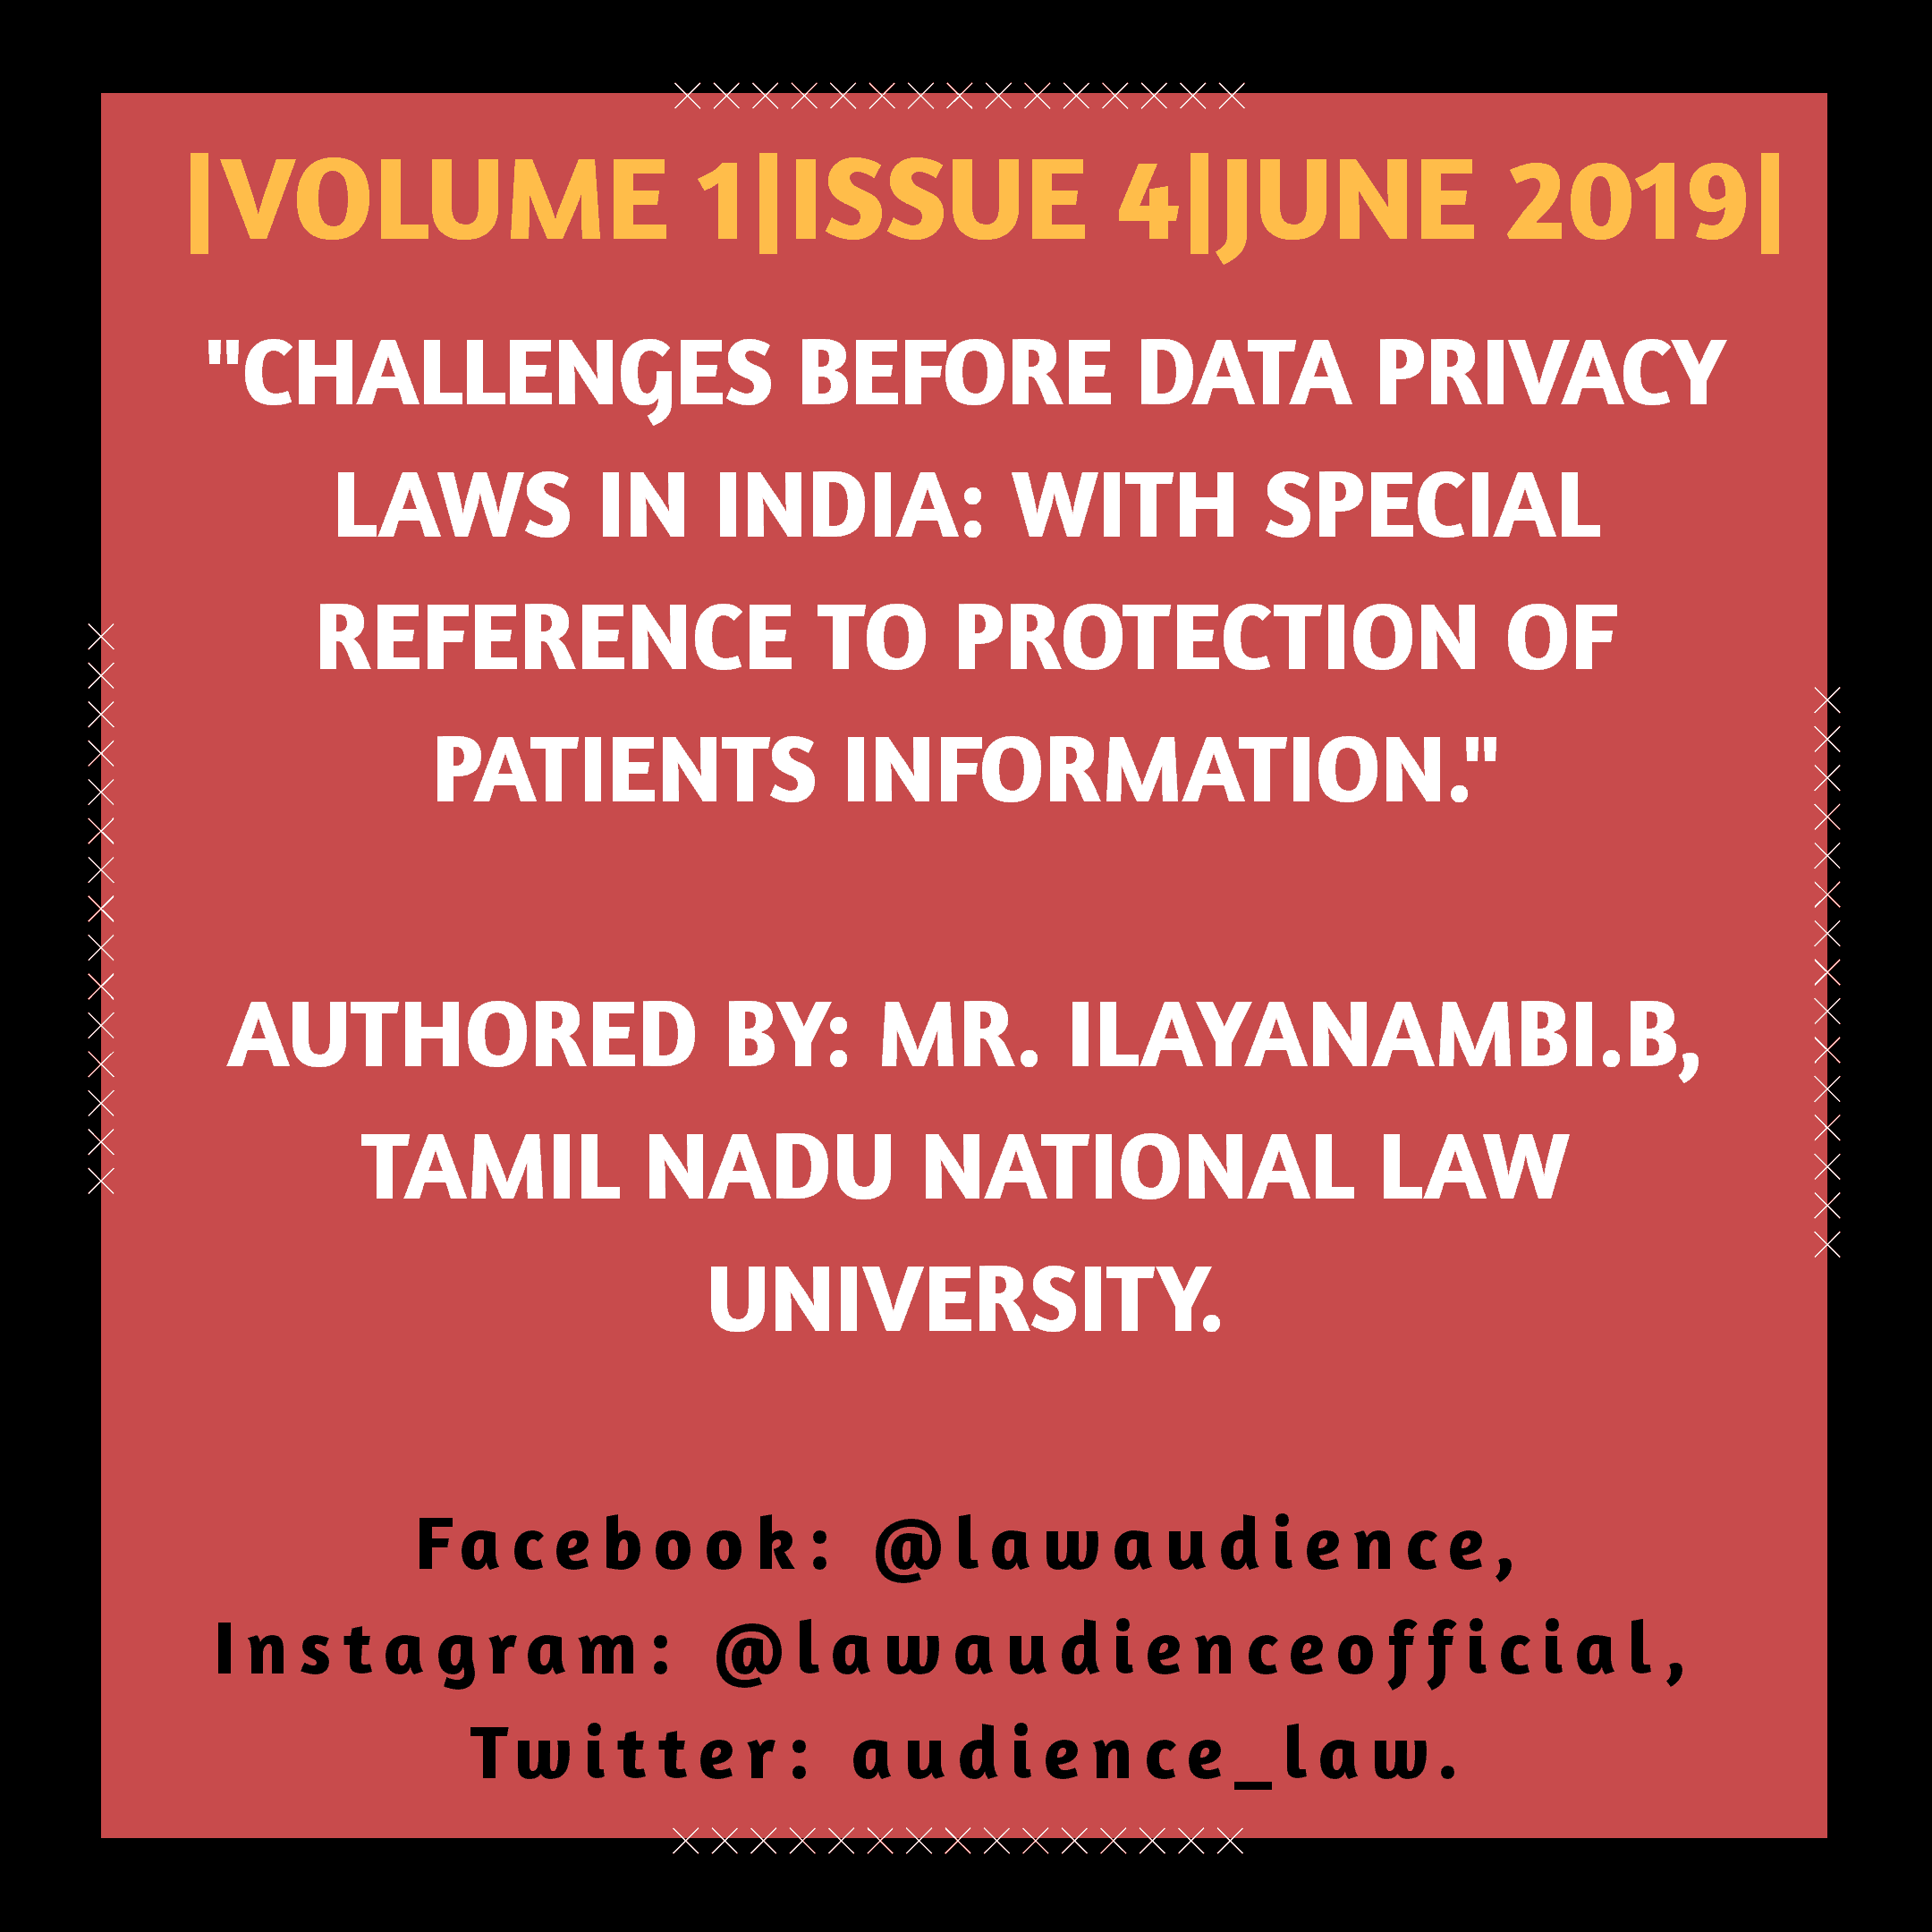 You are currently viewing CHALLENGES BEFORE DATA PRIVACY LAWS IN INDIA: WITH SPECIAL REFERENCE TO PROTECTION OF PATIENTS INFORMATION.